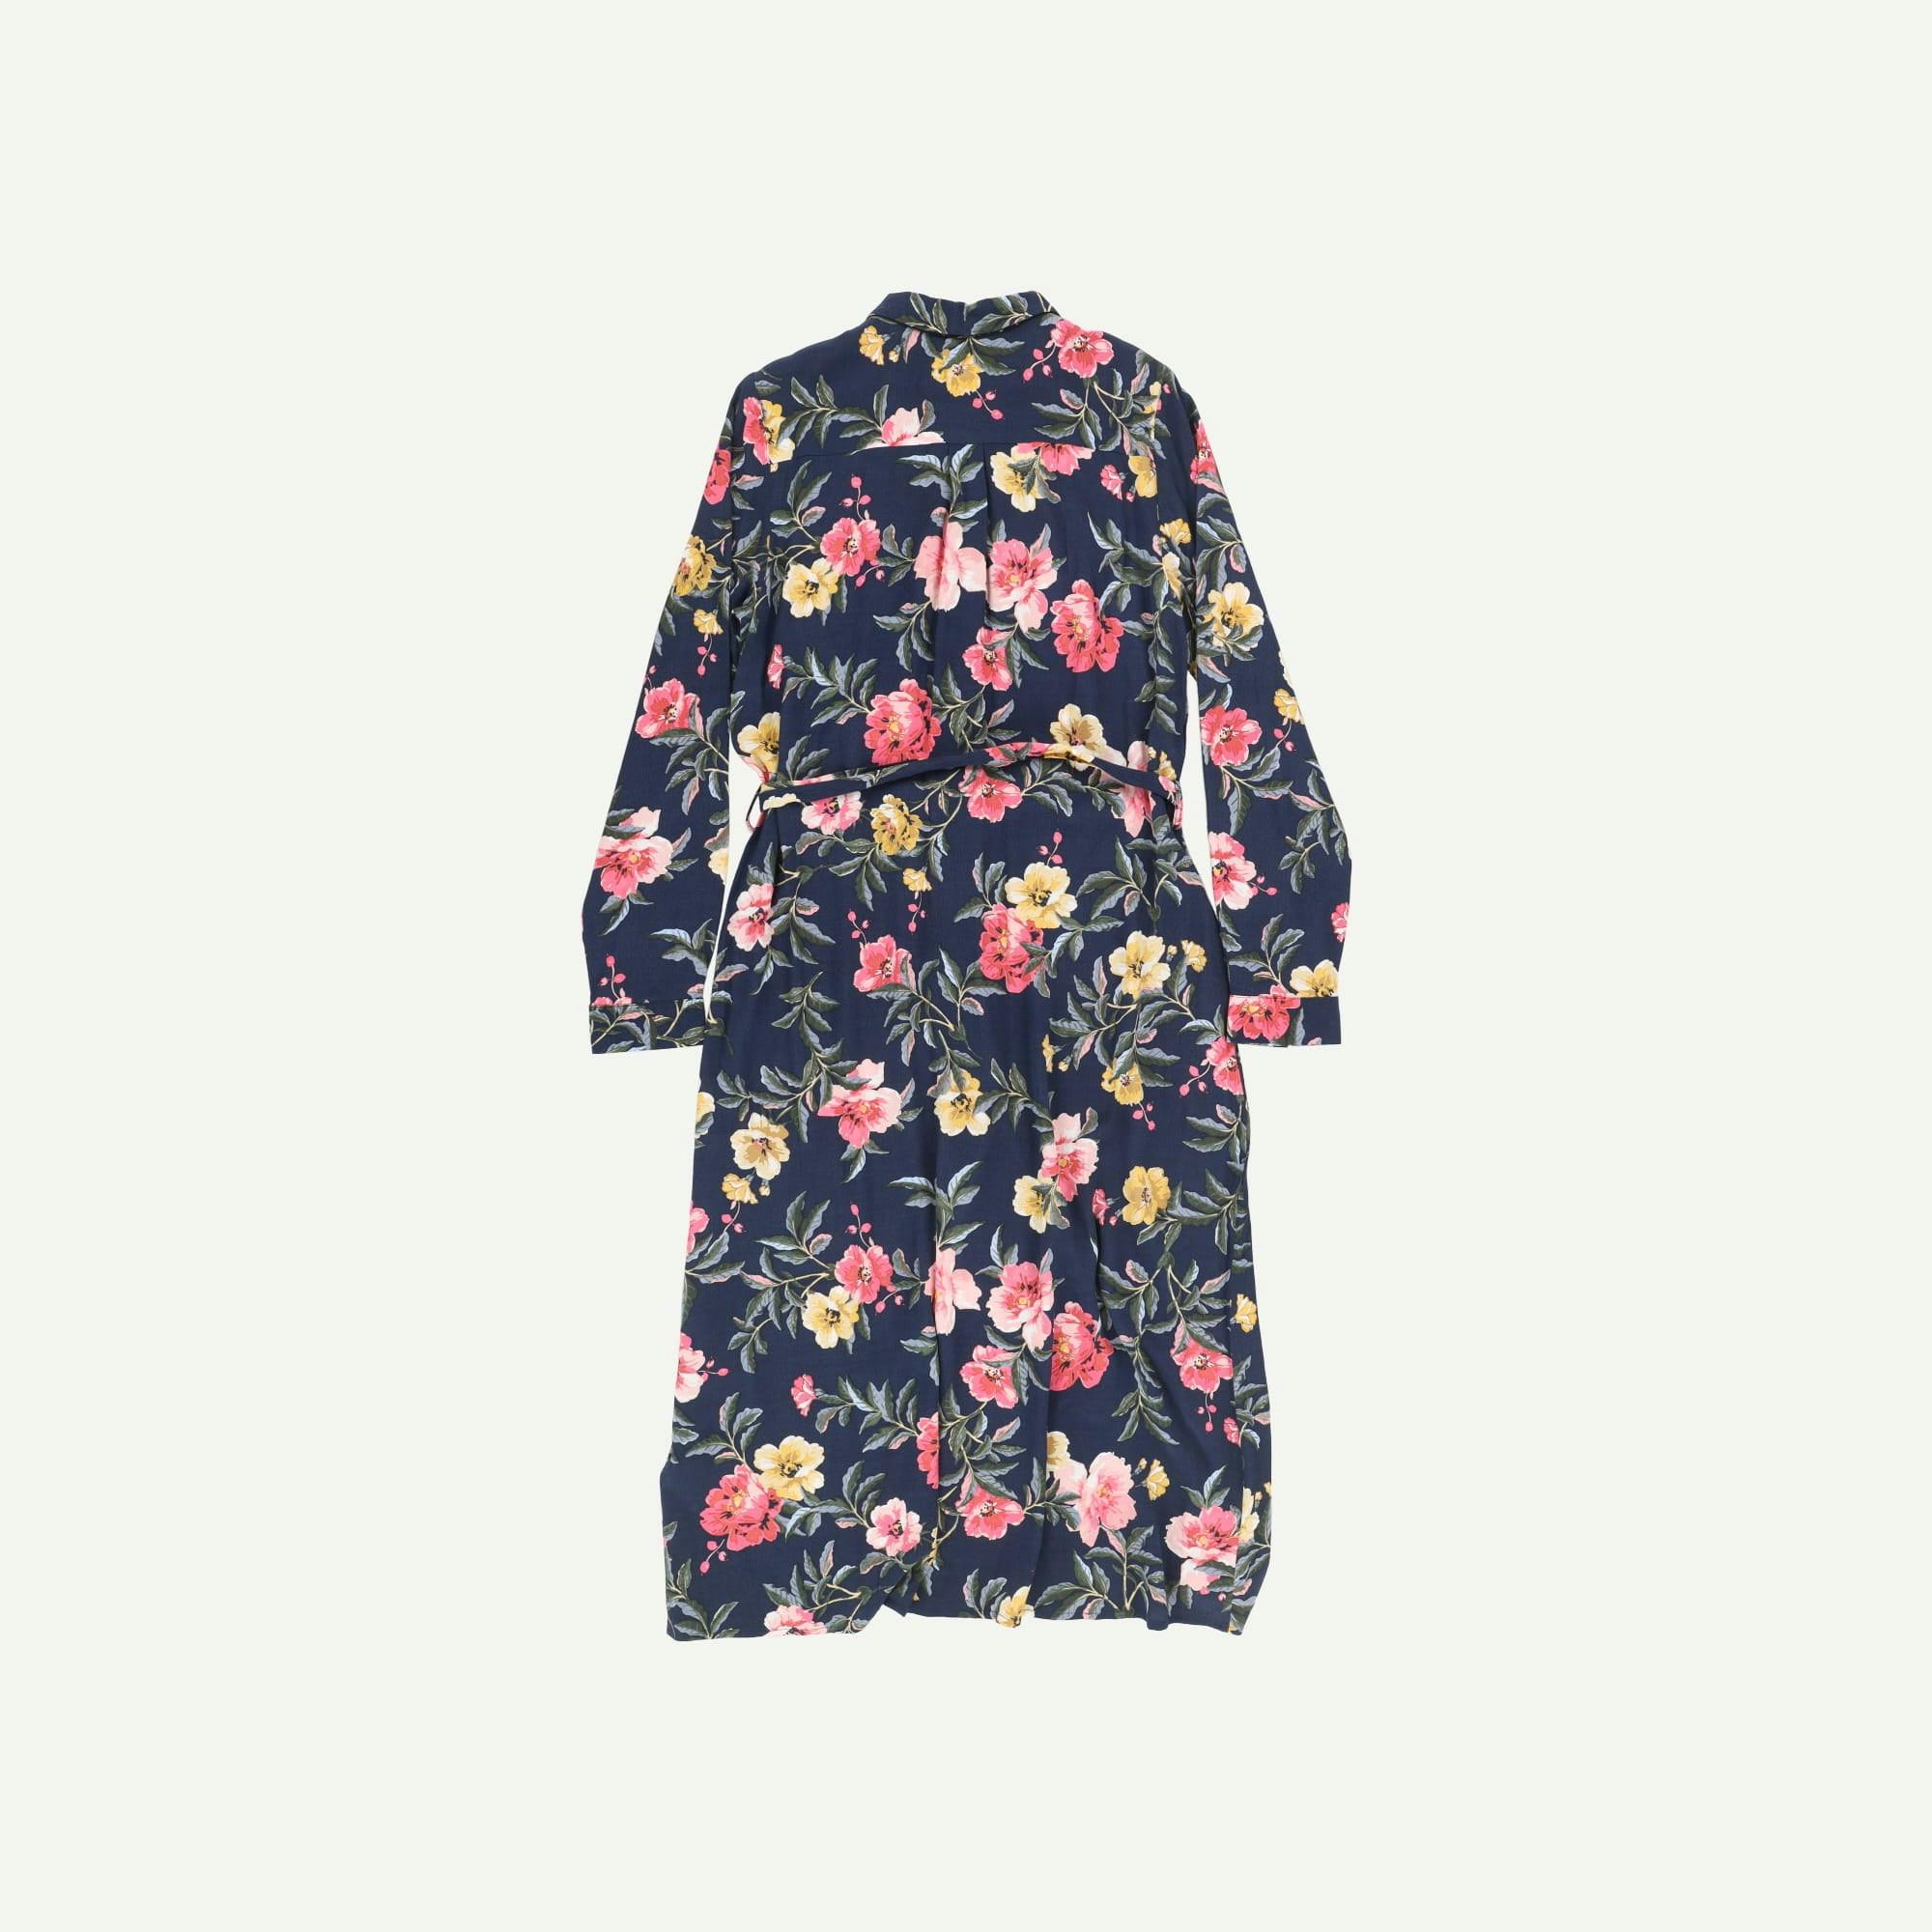 Joules Pre-loved Navy Dress